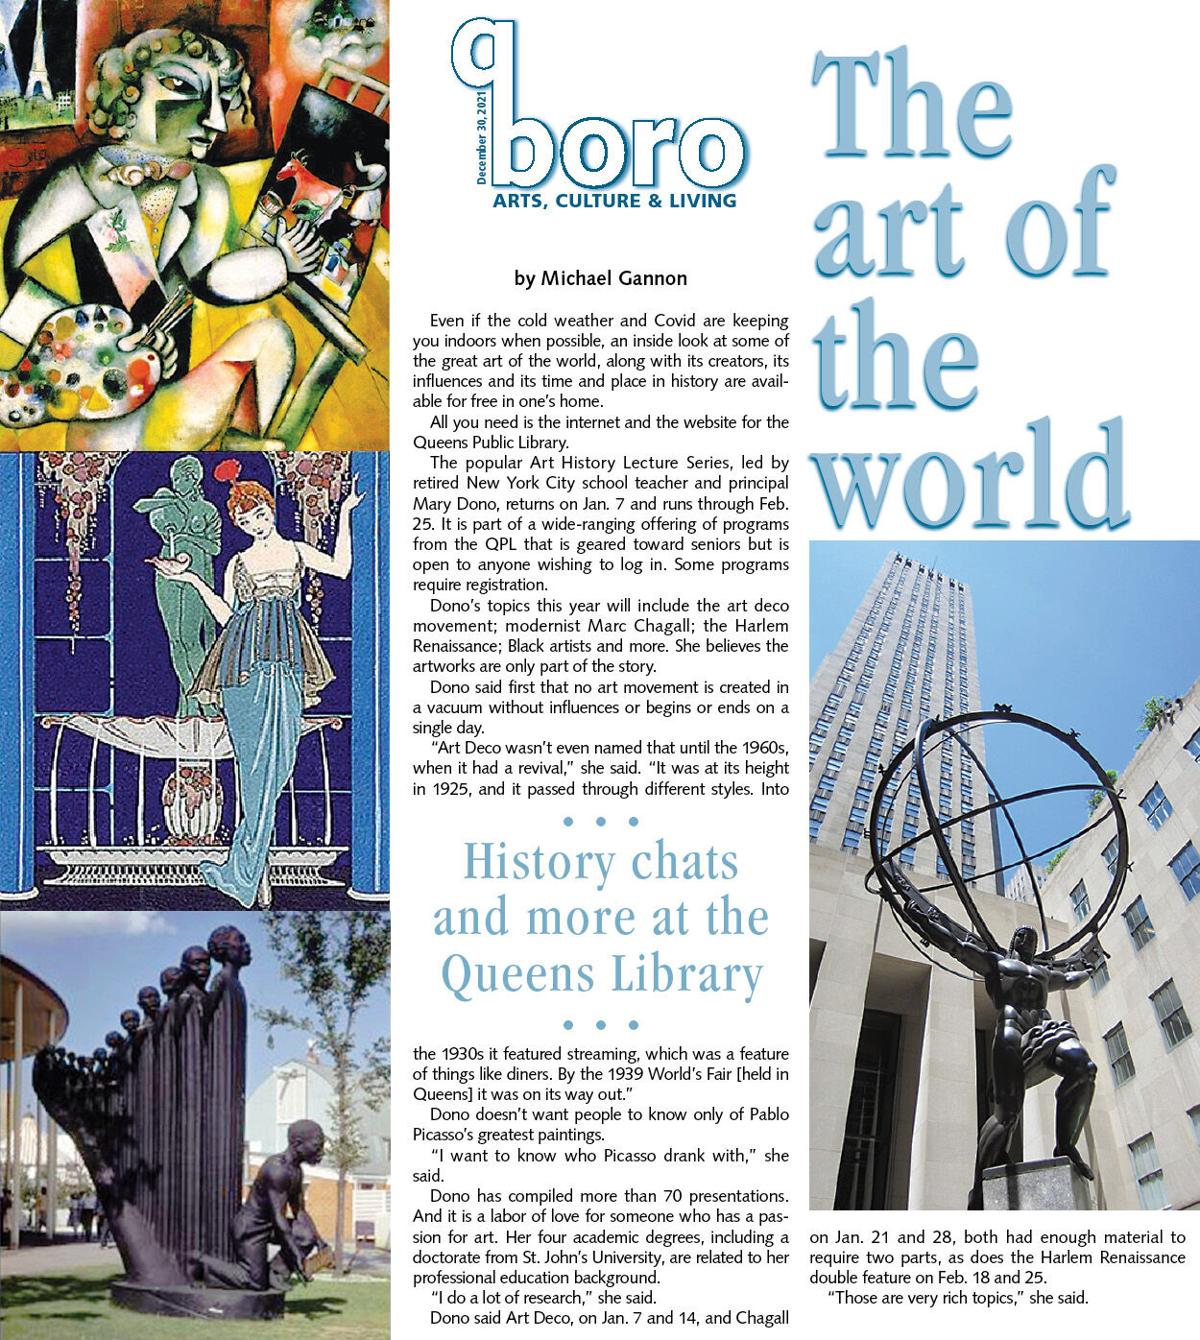 The art of the world from the Queens Library 1